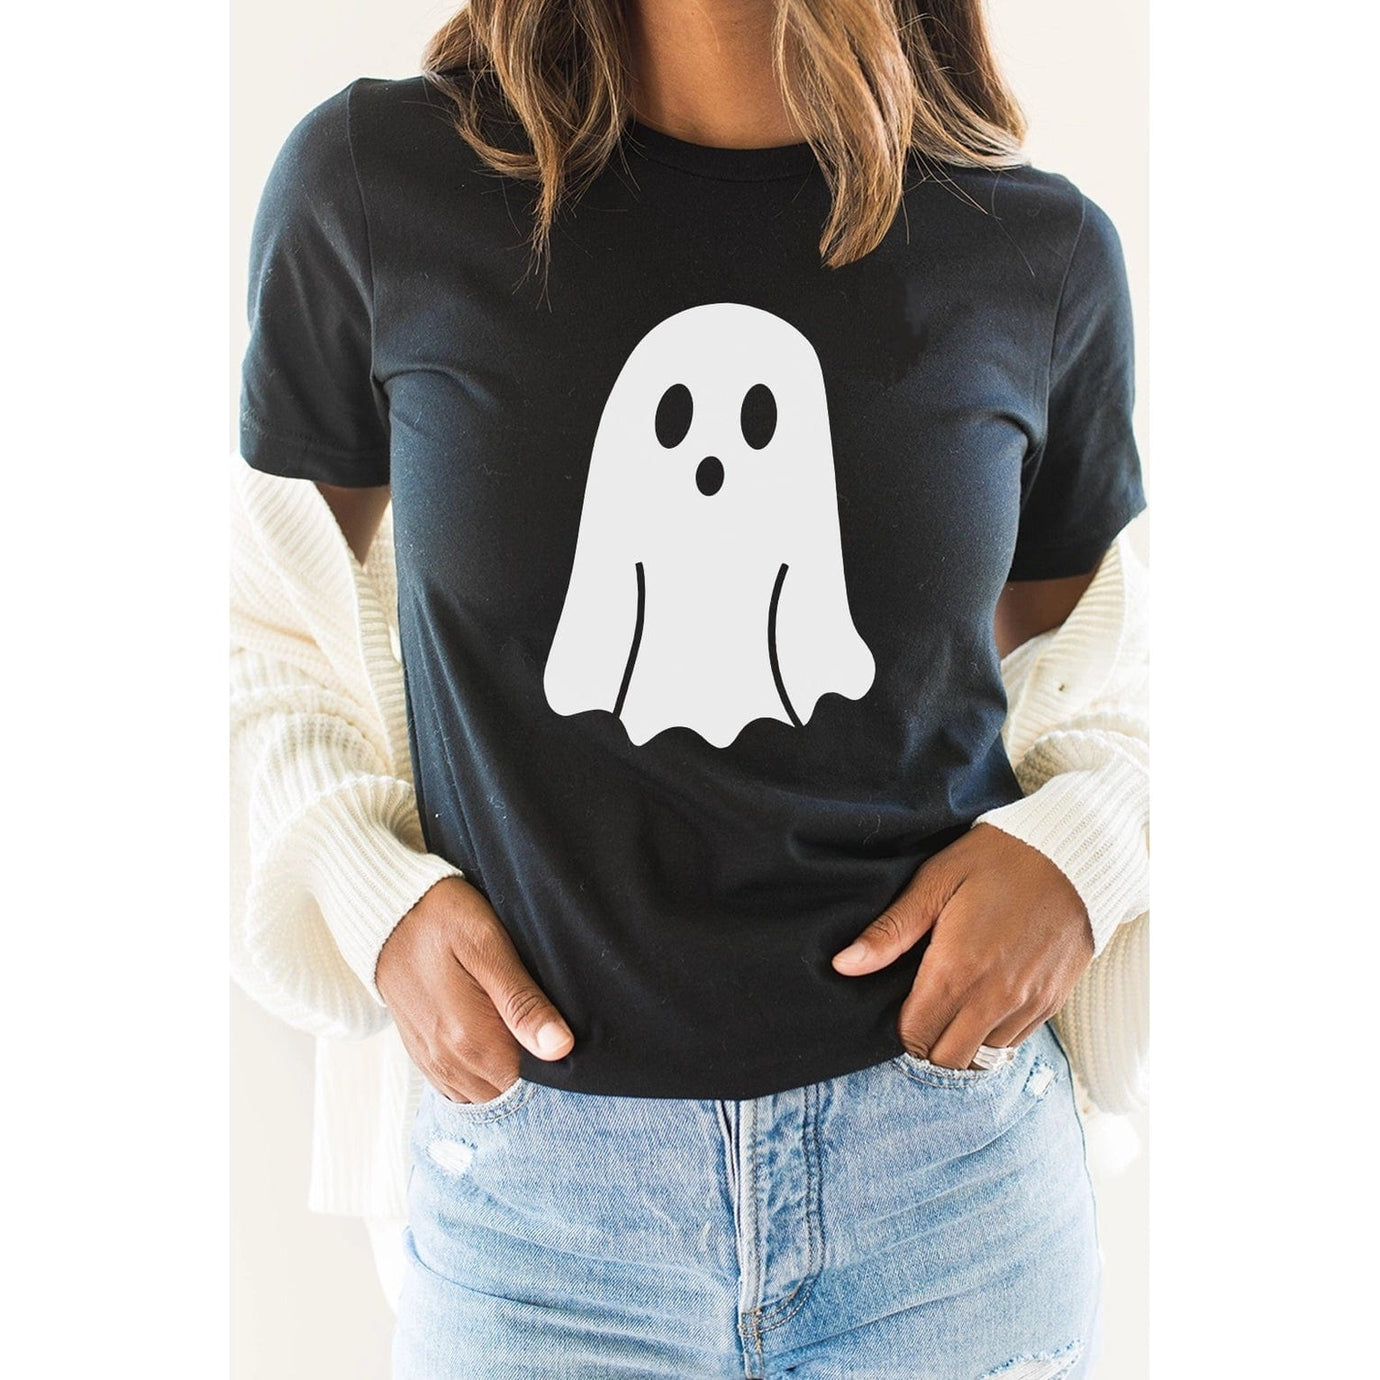 Spooky Cute Ghost Halloween Black Women's Graphic Tee Kissed Apparel Lil Tulips